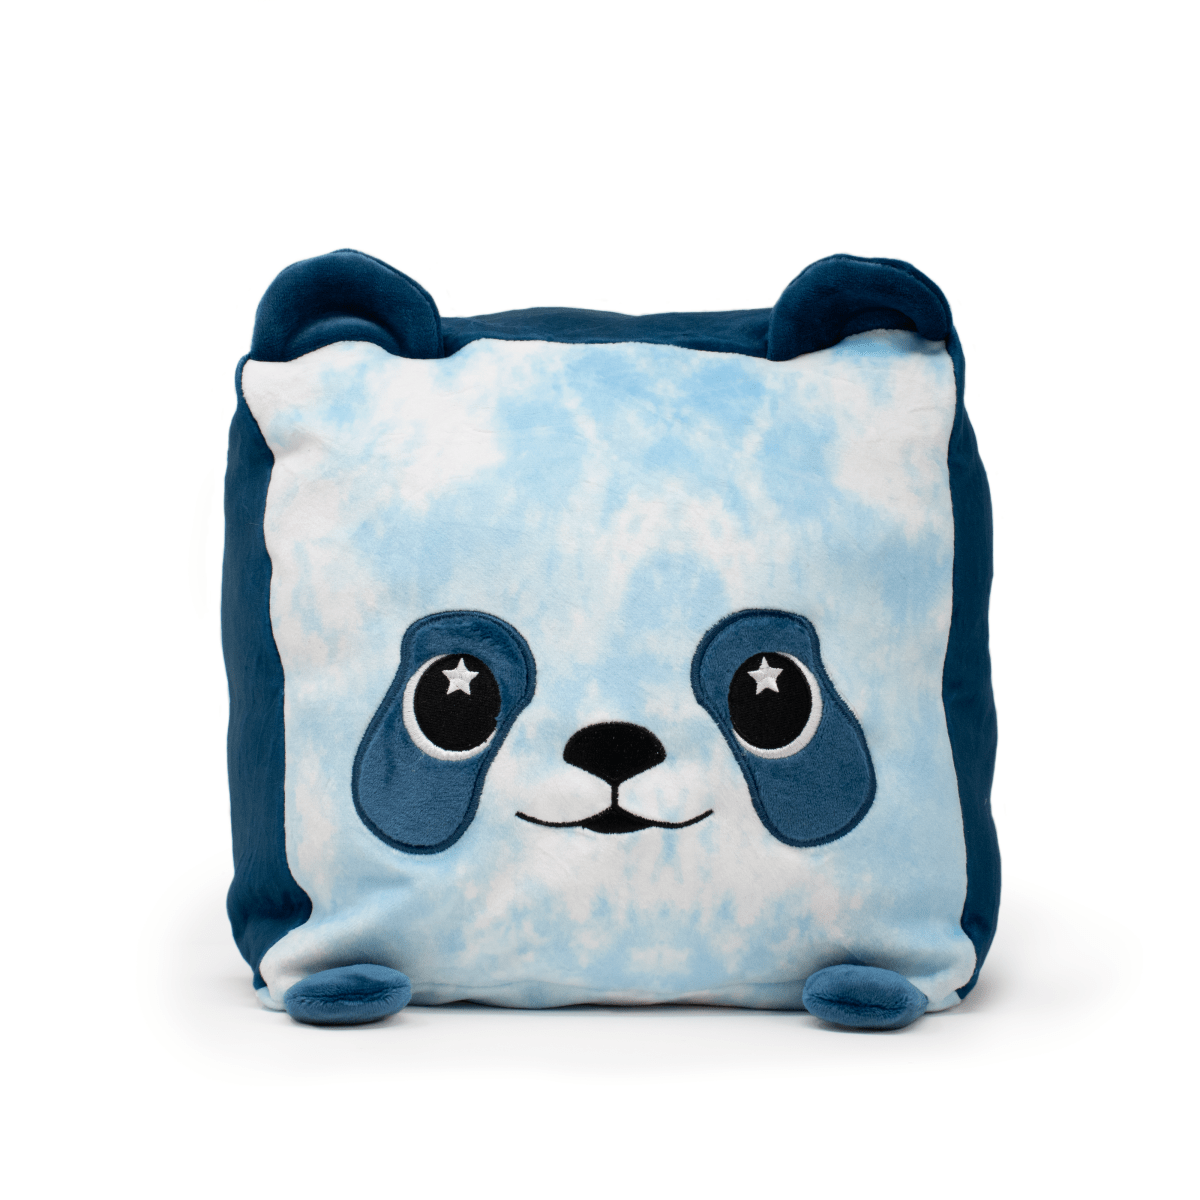 Tonya the Panda plush toy with soothing blue hues and round eyes from Moosh-Moosh SQUARED² Collection.